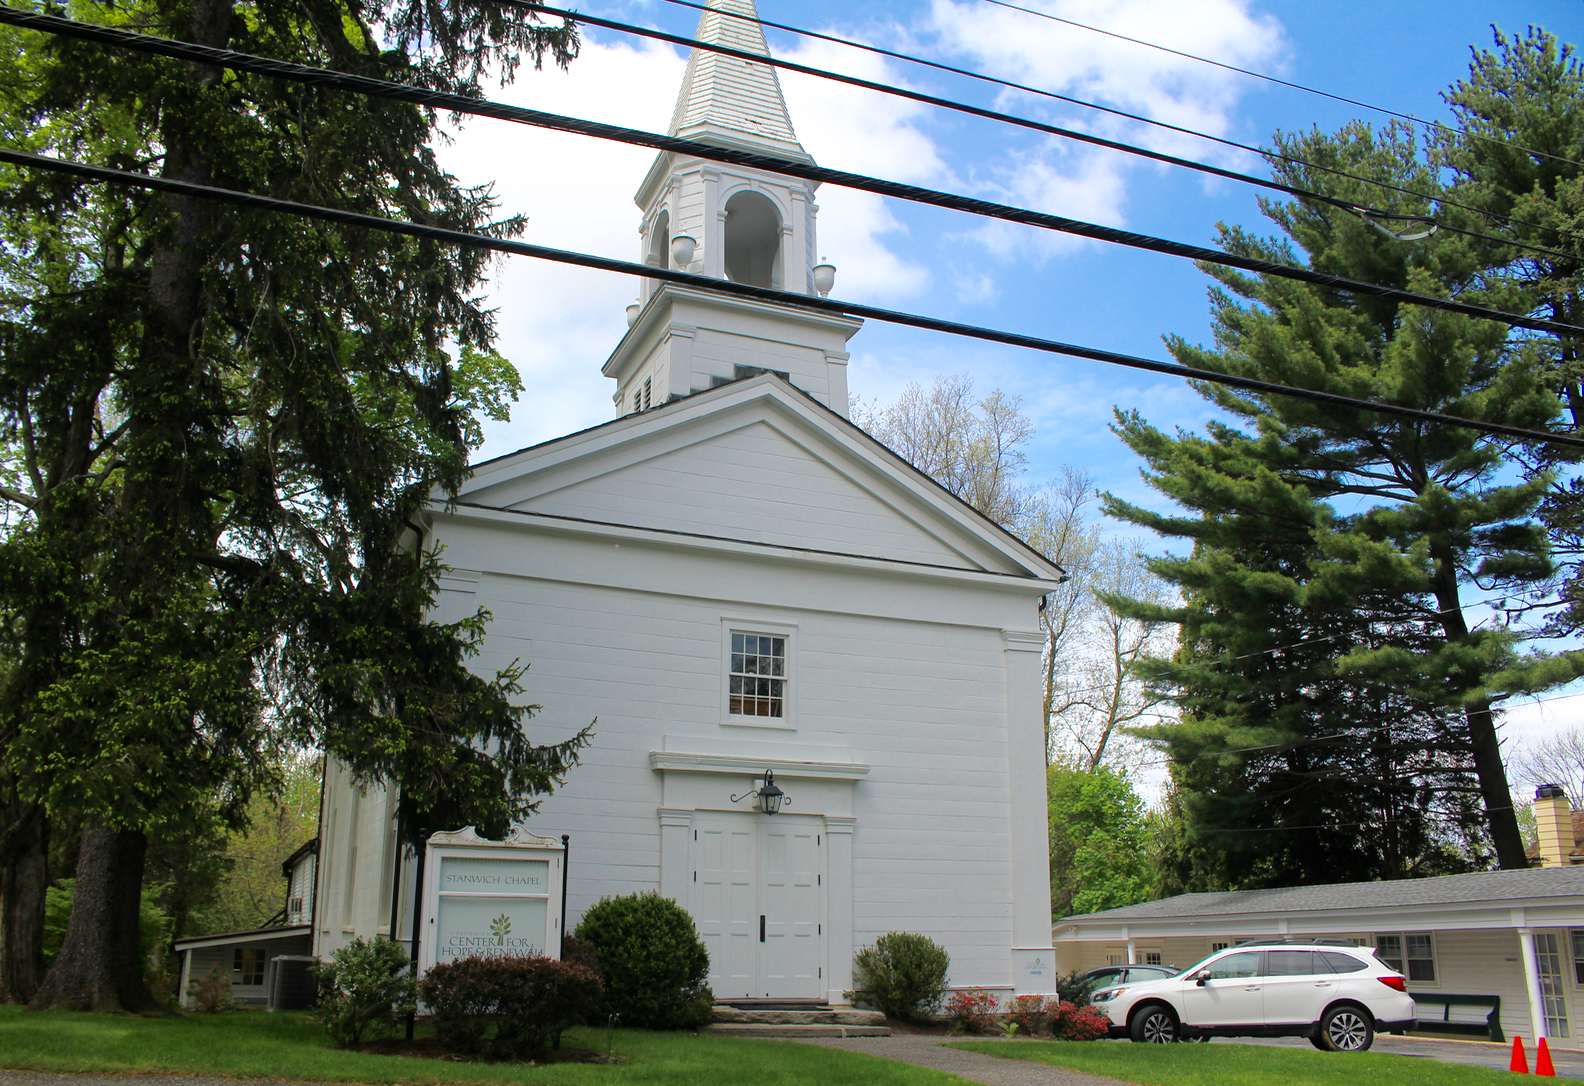 The old Stanwich Church on Taconic Road in back country Greenwich. Photo: Leslie Yager